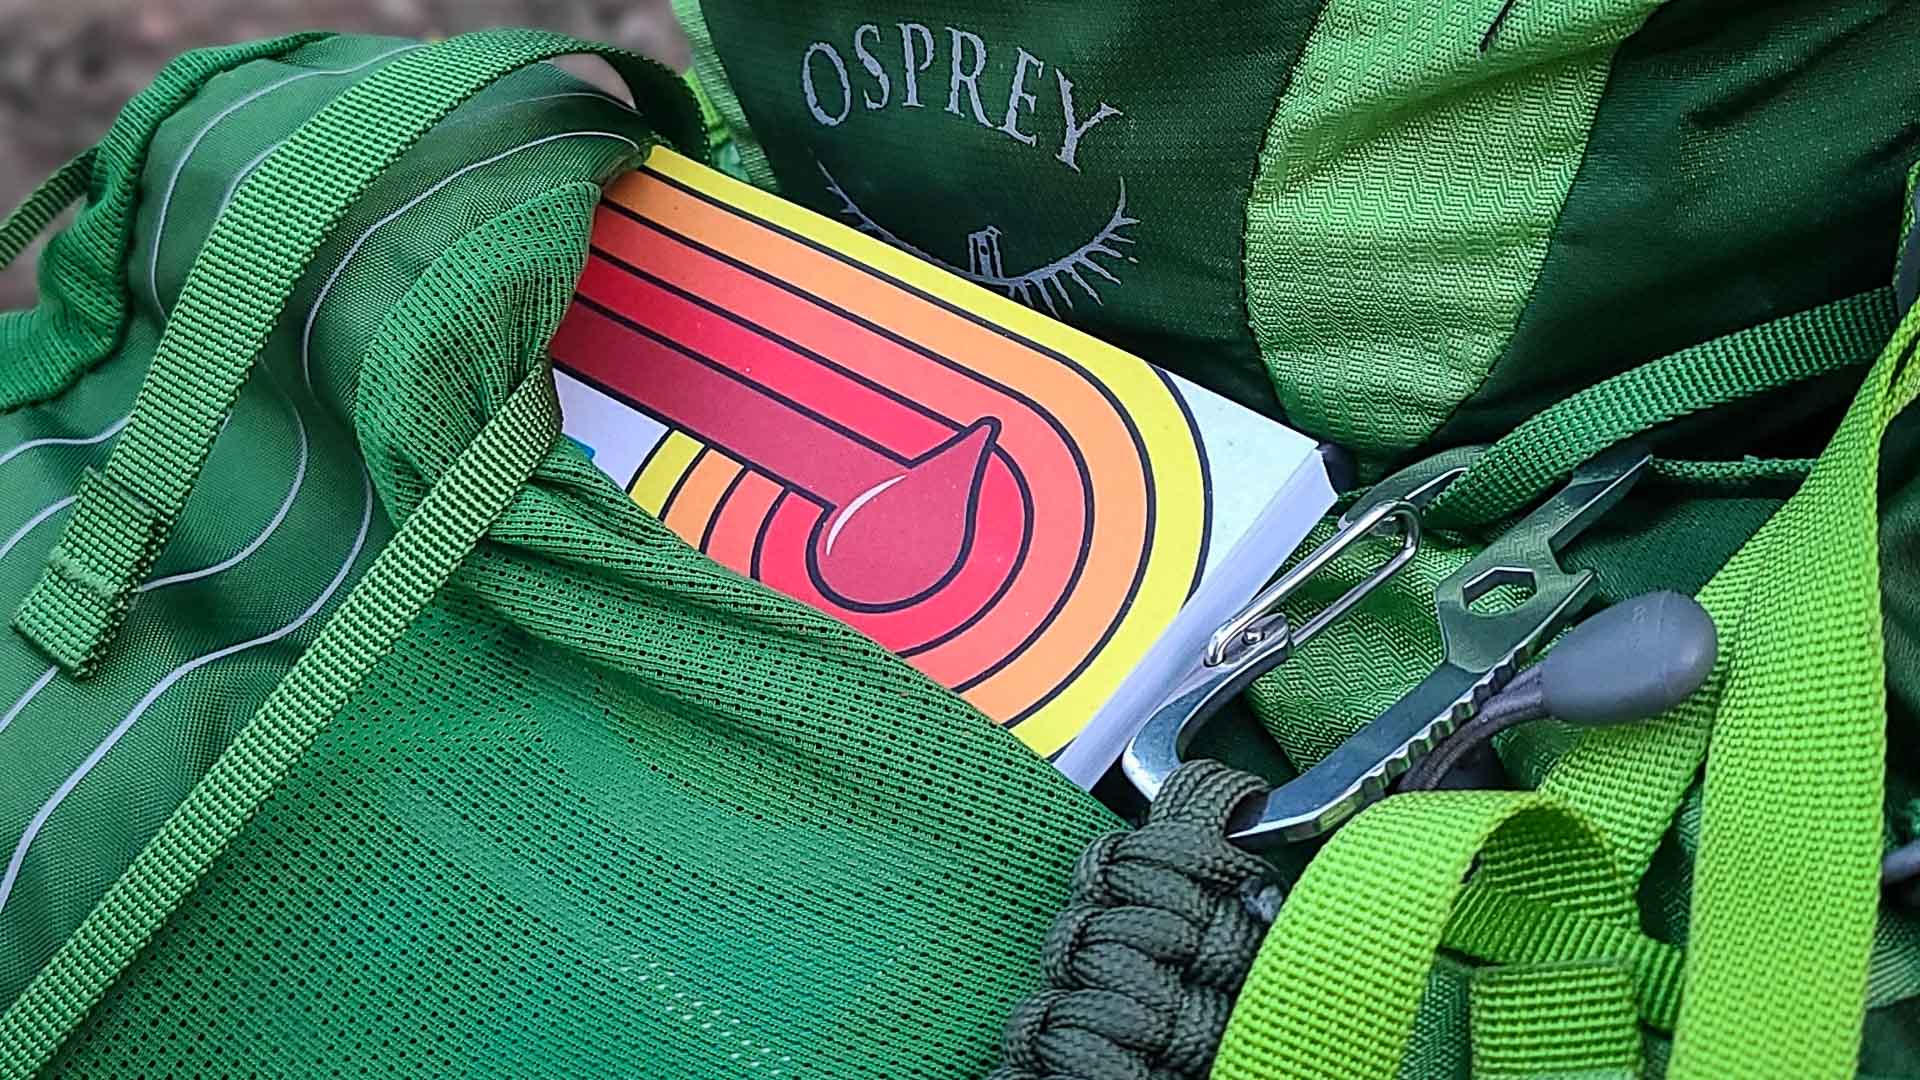 Hiking with diabetes journal in an osprey backpack